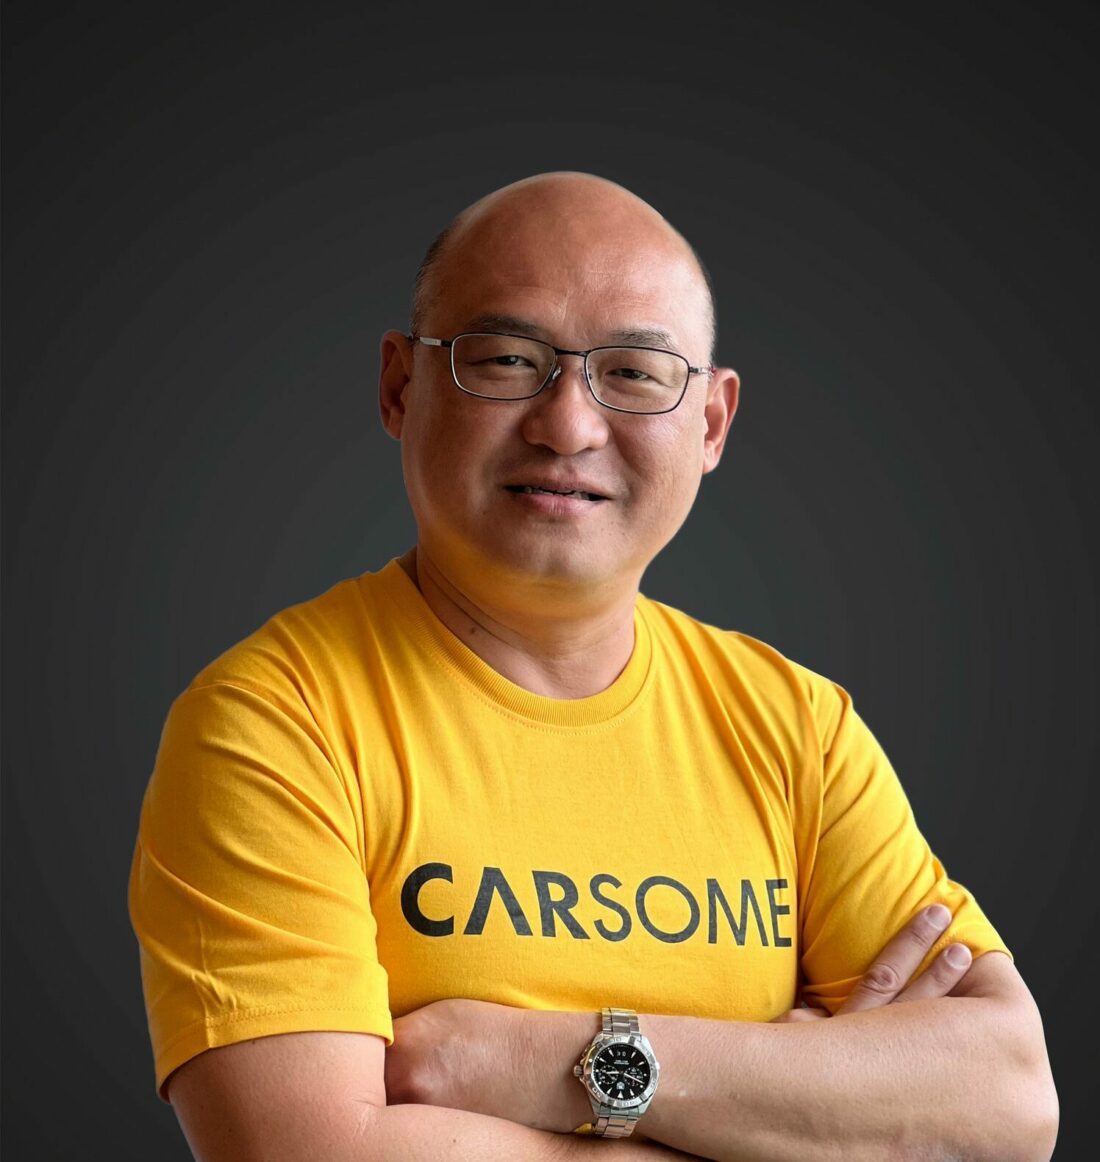 CARSOME ropes in Eric Chan as new COO, Aaron Kee moves to new role